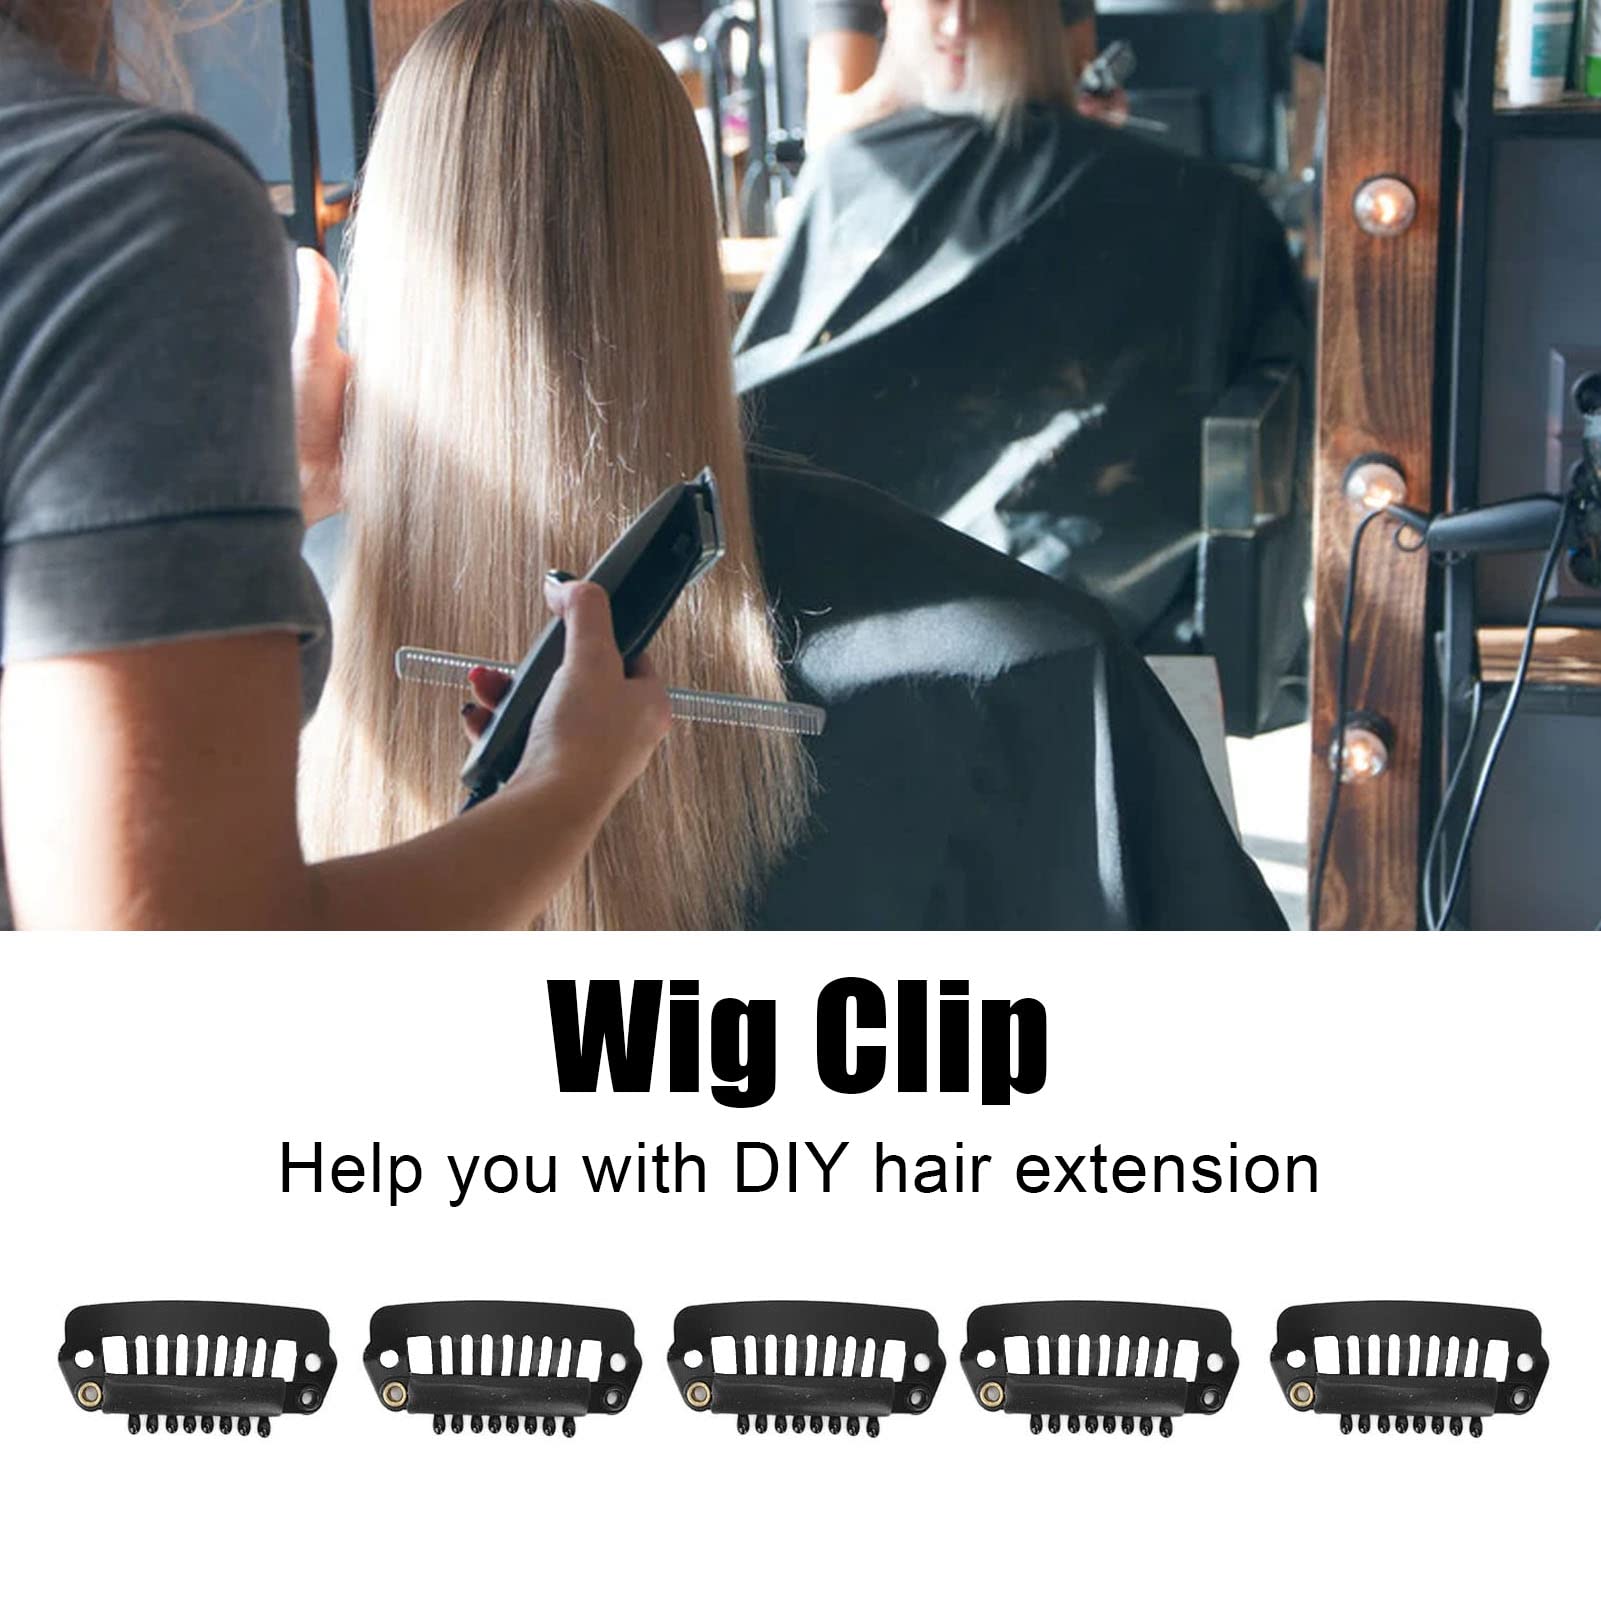 Wig Clips to Secure Wig No Sew,Wig Clips to Secure Wig,Hair Wig Clips Hair Extension Clips Set Stainless Steel DIY 8 Teeth Snap Comb Wig Clips Accessories 1.1in (50pcs)(black)